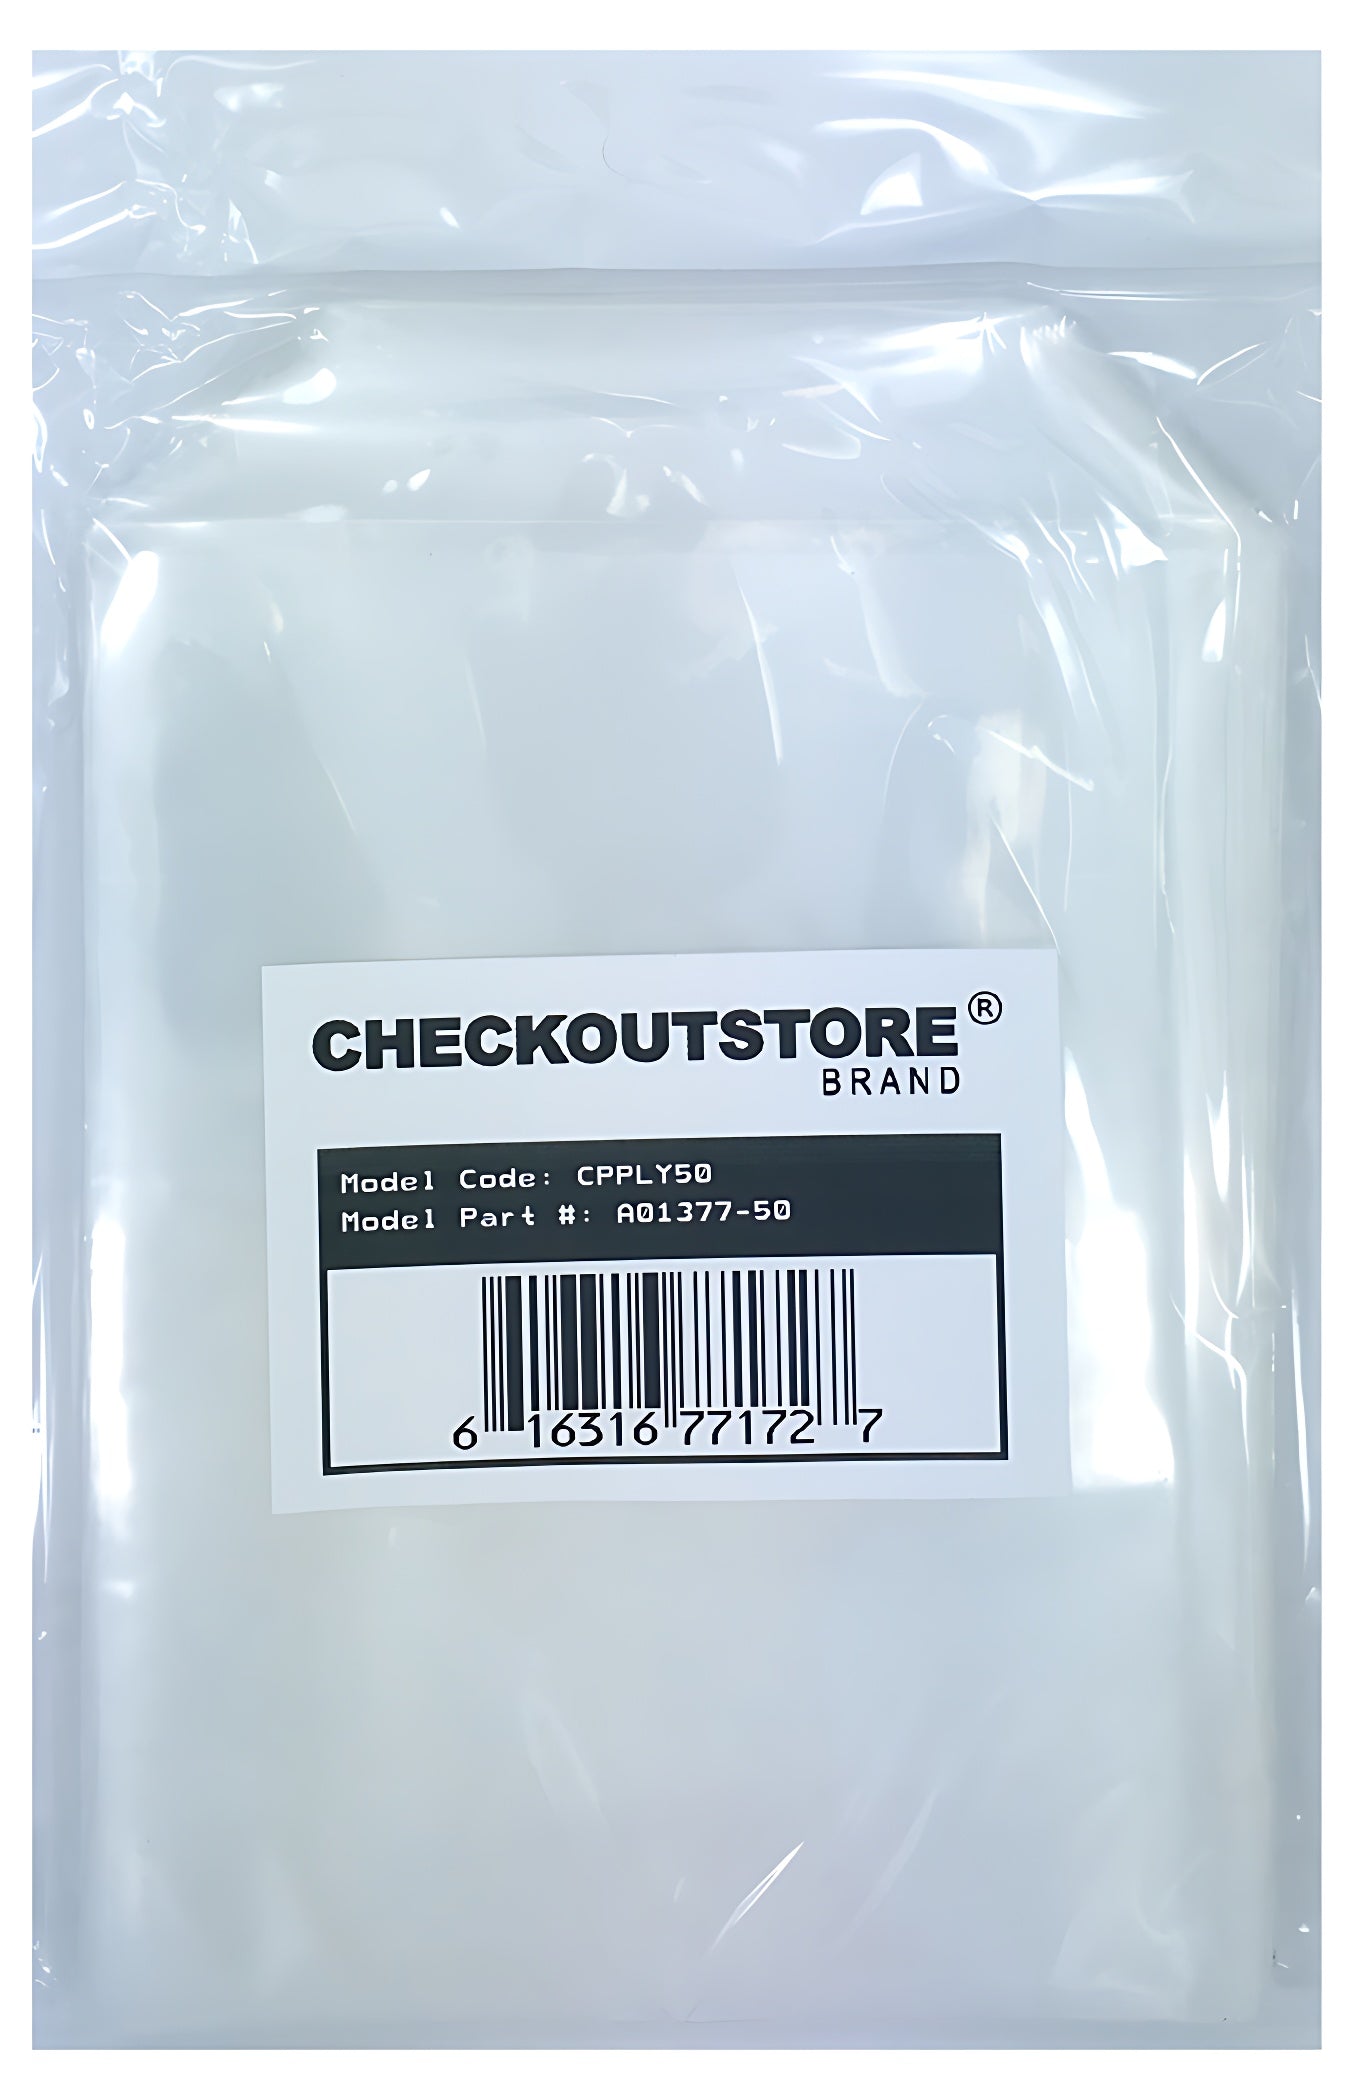 100 CheckOutStore White Non Woven Storage Sleeves for 12x12 Cardstock Paper